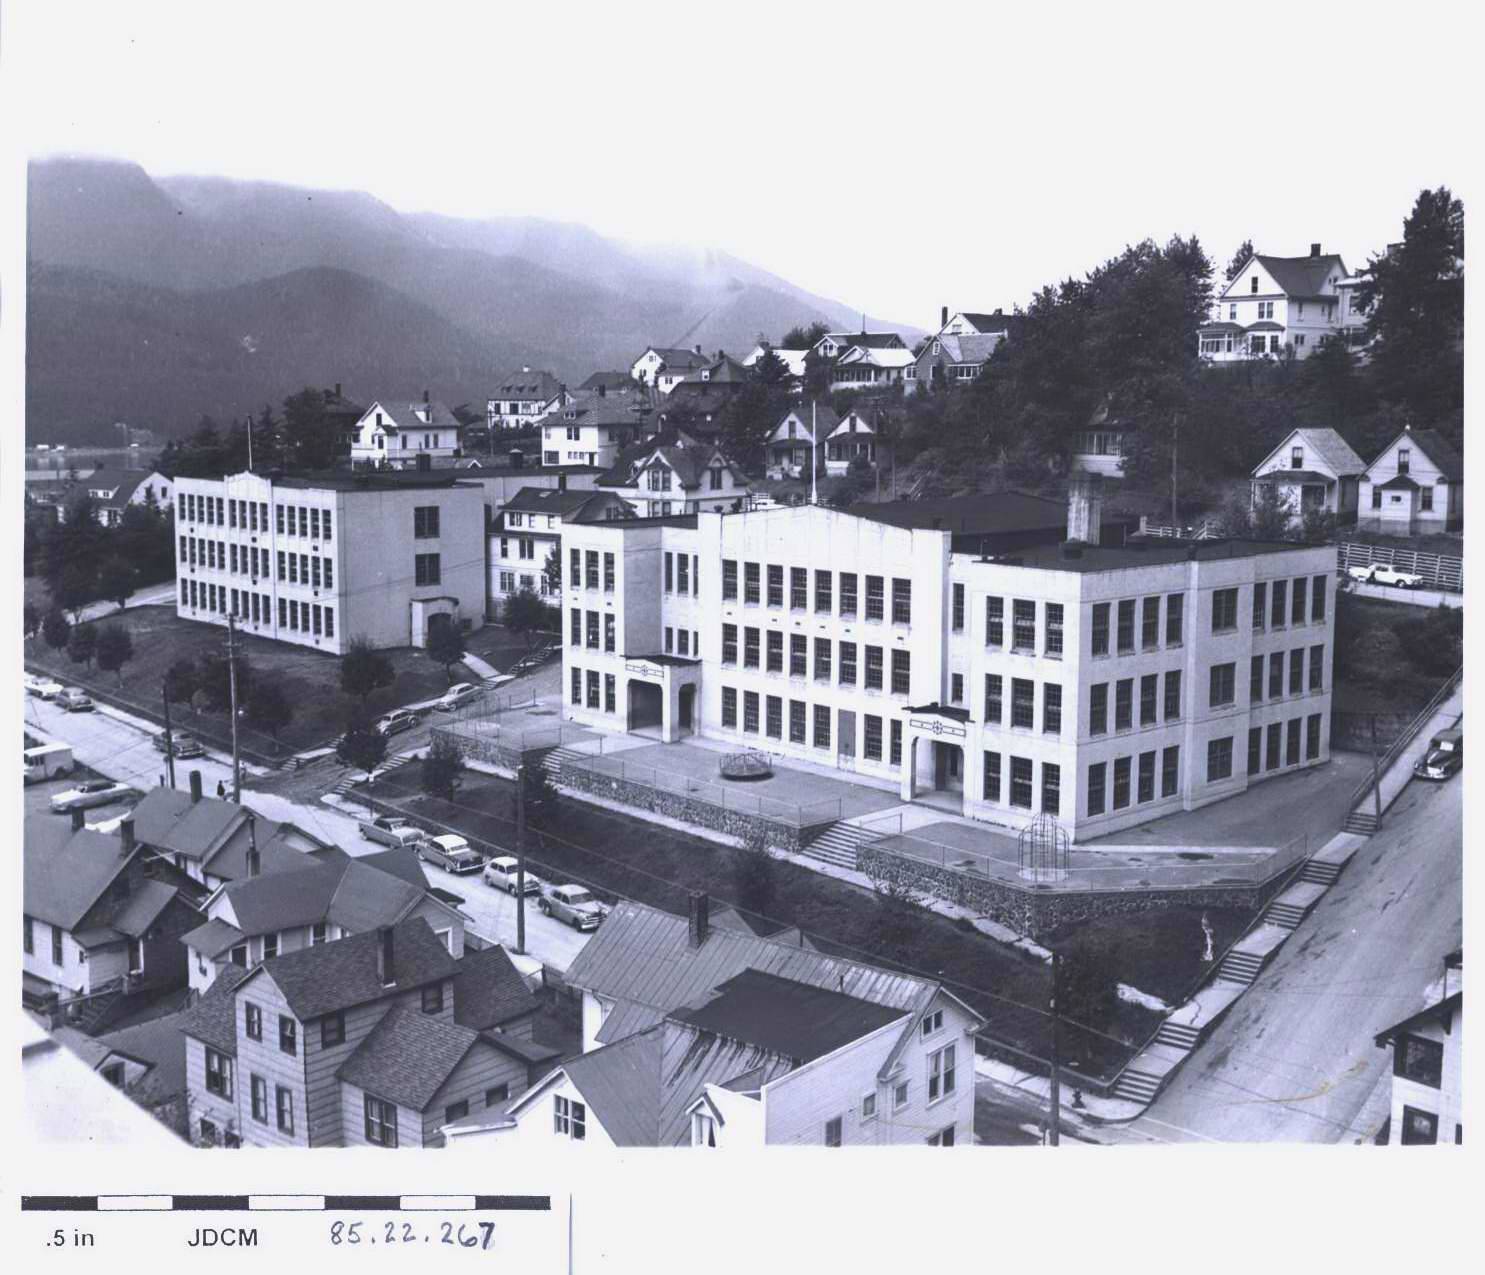 Between 1887 and 1997, a school occupied a portion of the land now known as Capital School Park. (Undated photo courtesy of the Juneau-Douglas City Museum)